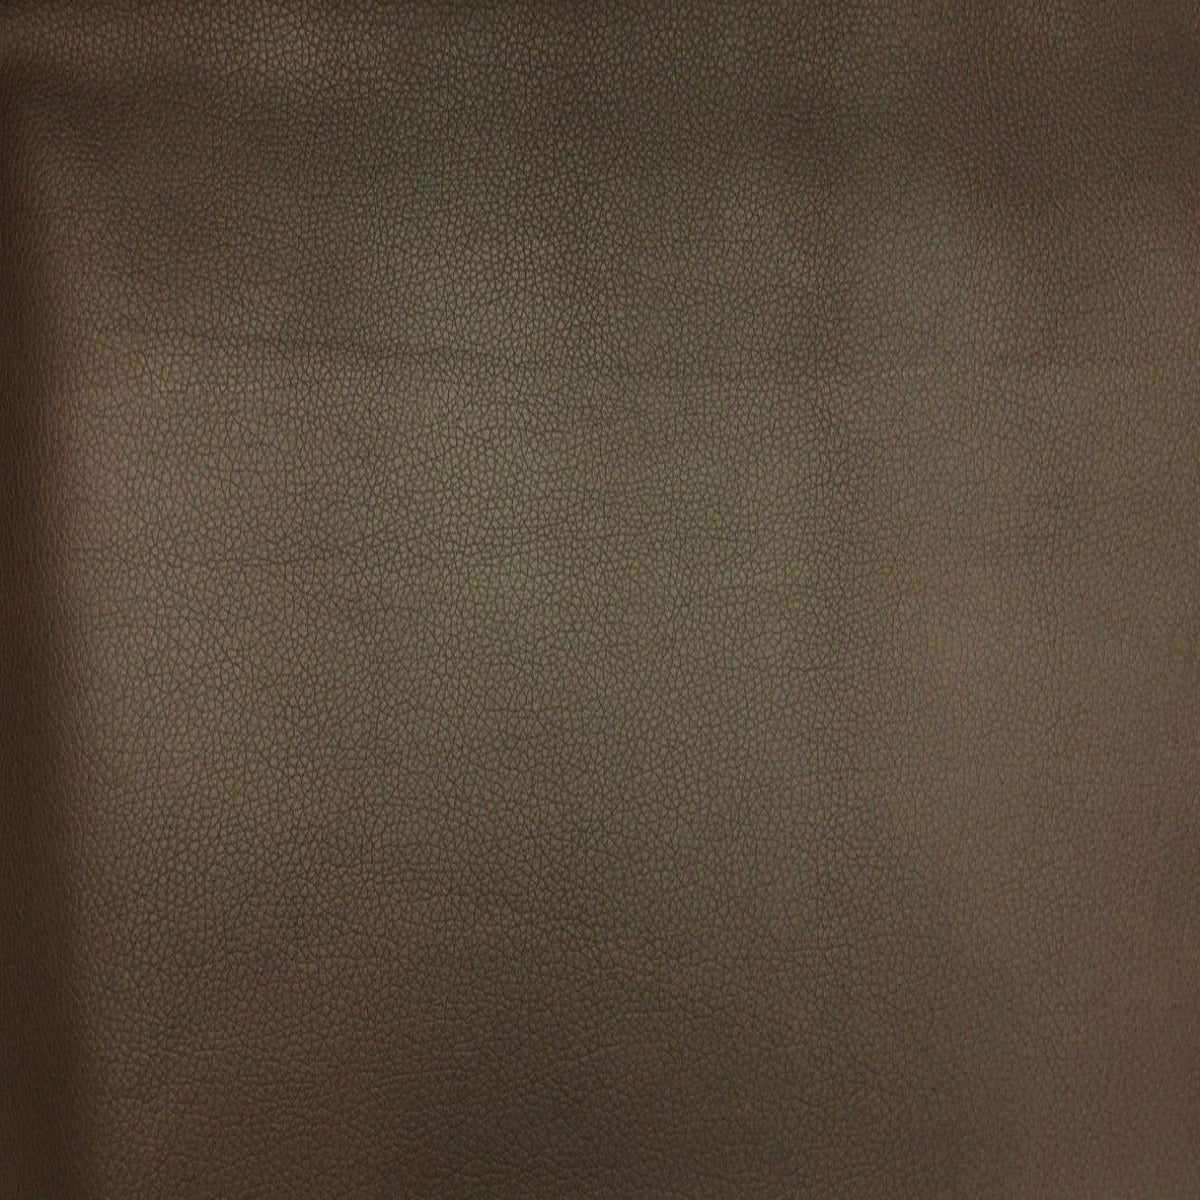 Brown Faux Leather Pigskin Fabric - Fashion Fabrics Los Angeles 